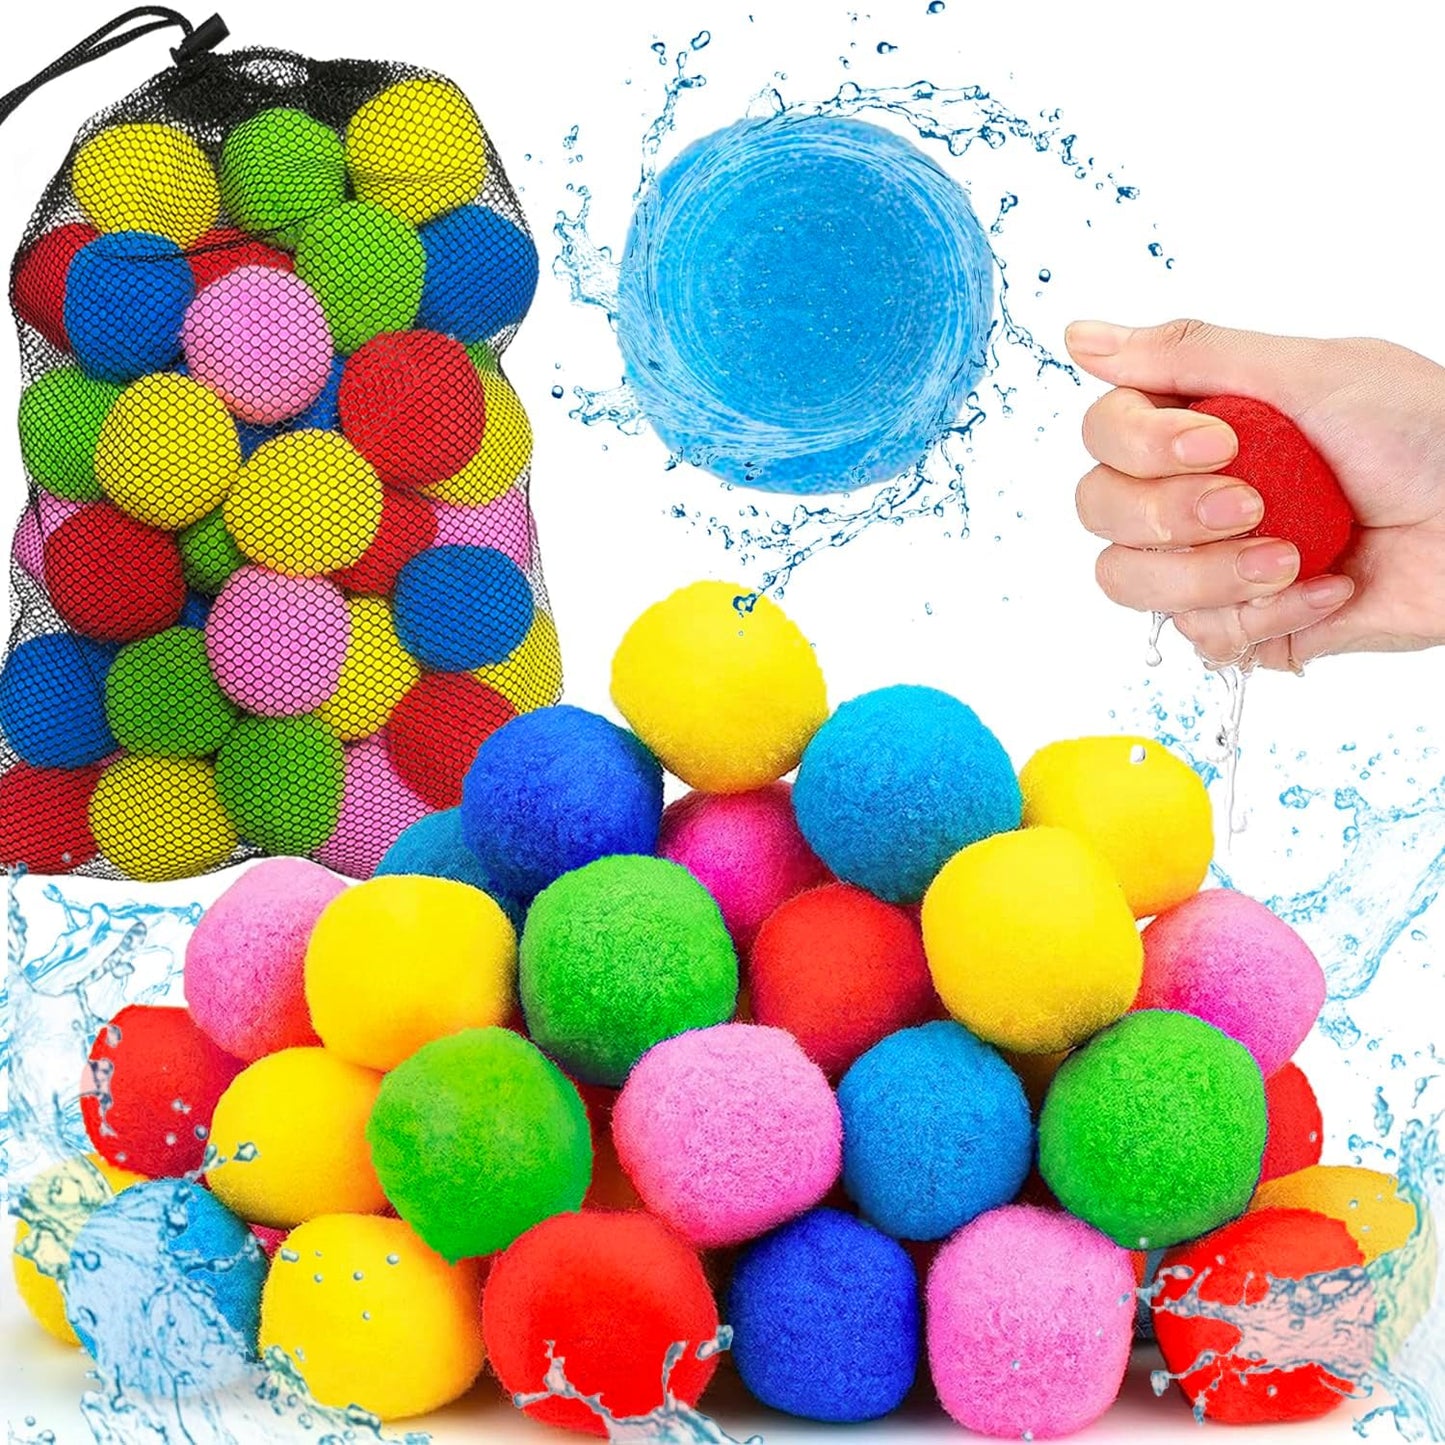 12Pcs Water Balls Reusable Water Balloons, Outdoor Water Toys Kids outside Games Activities for Backyard Lawn Beach Pool Party Favors, Toddler Summer Fun Sport Activity Games for Kids Boys Girls